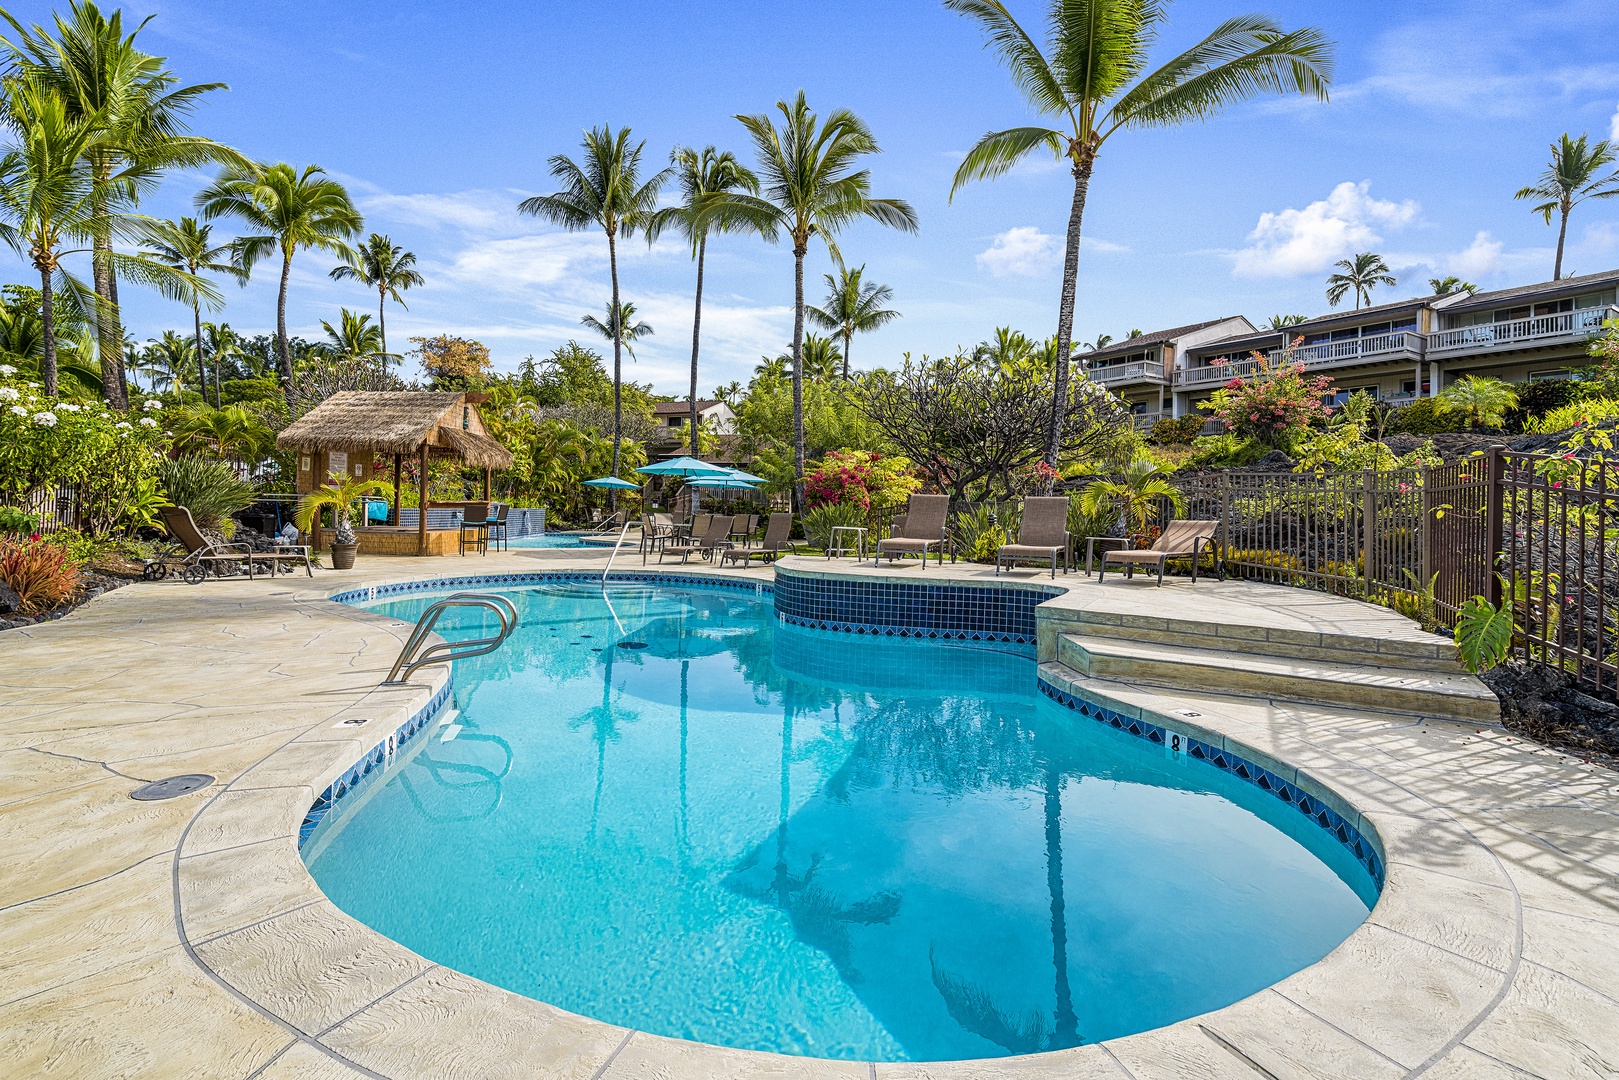 Kailua-Kona Vacation Rentals, Keauhou Resort 116 - Keauhou Resort is situated on 5 acres with only 48 units and two private swimming pools, walk to Keauhou Bay in less than 5 minutes to easily access and enjoy all ocean activities.